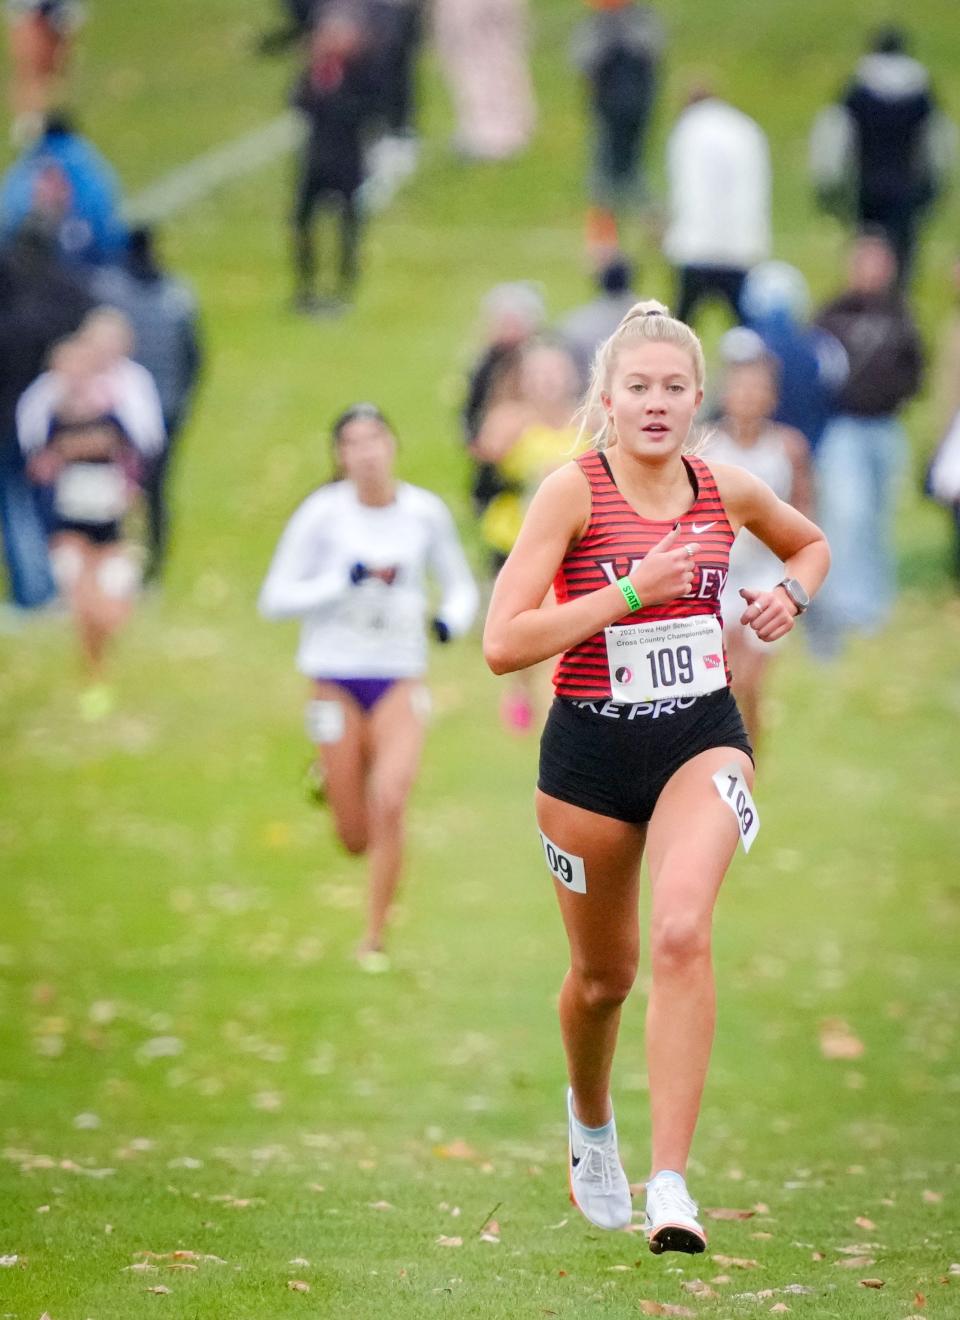 Addison Dorenkamp of Valley won the Class 4A state cross country championship Friday in Fort Dodge.